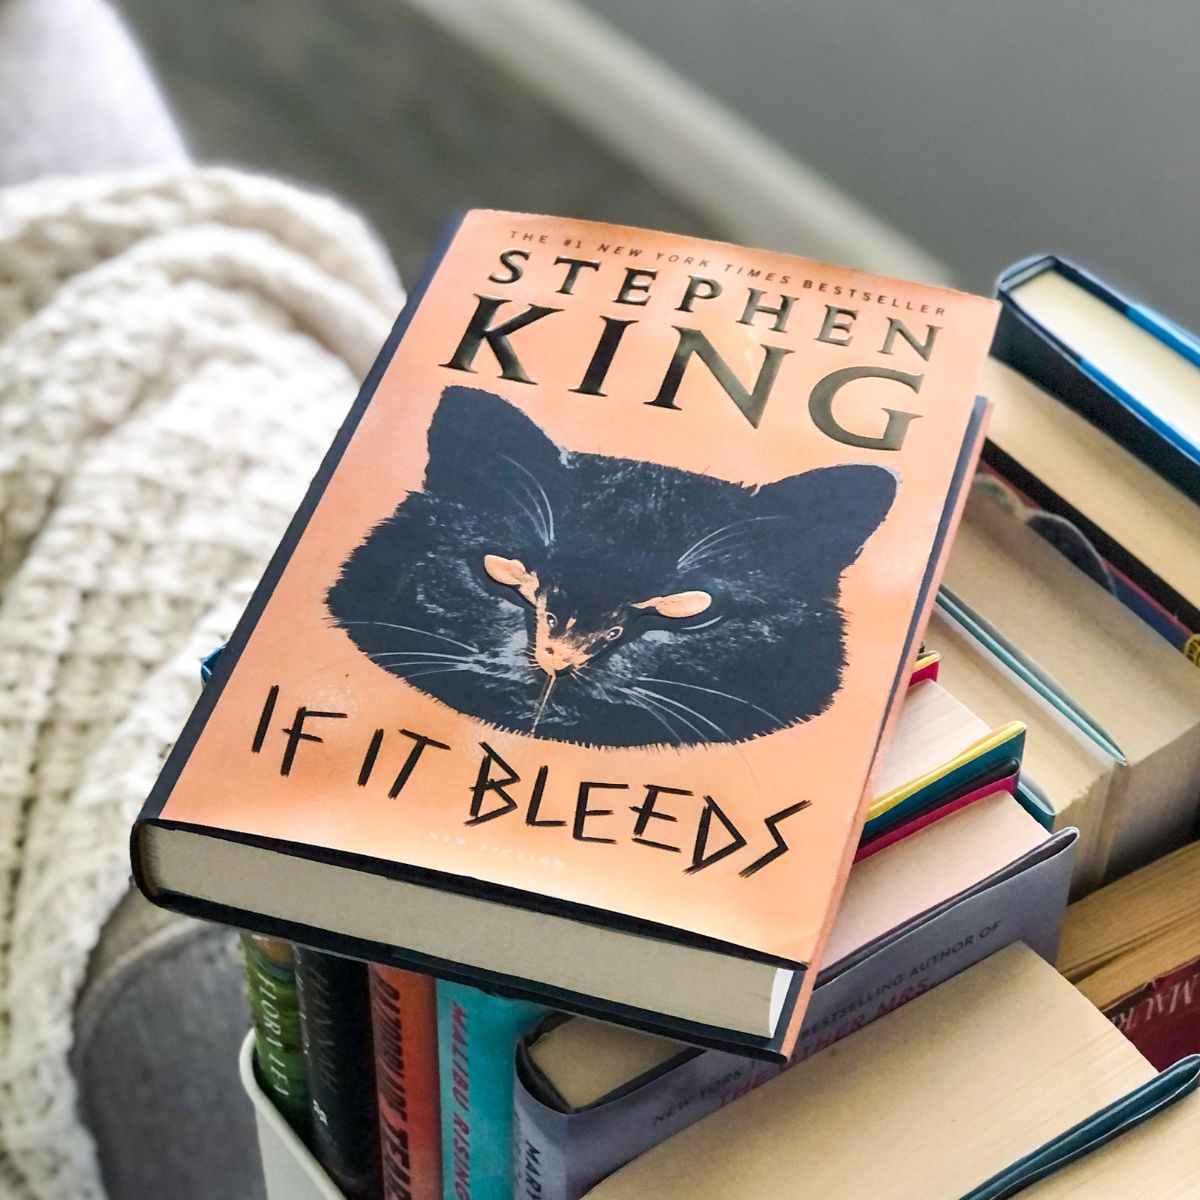 If It Bleeds by Stephen King Holly Gibney novella book cover sitting in a book cart with a white blanket behind it